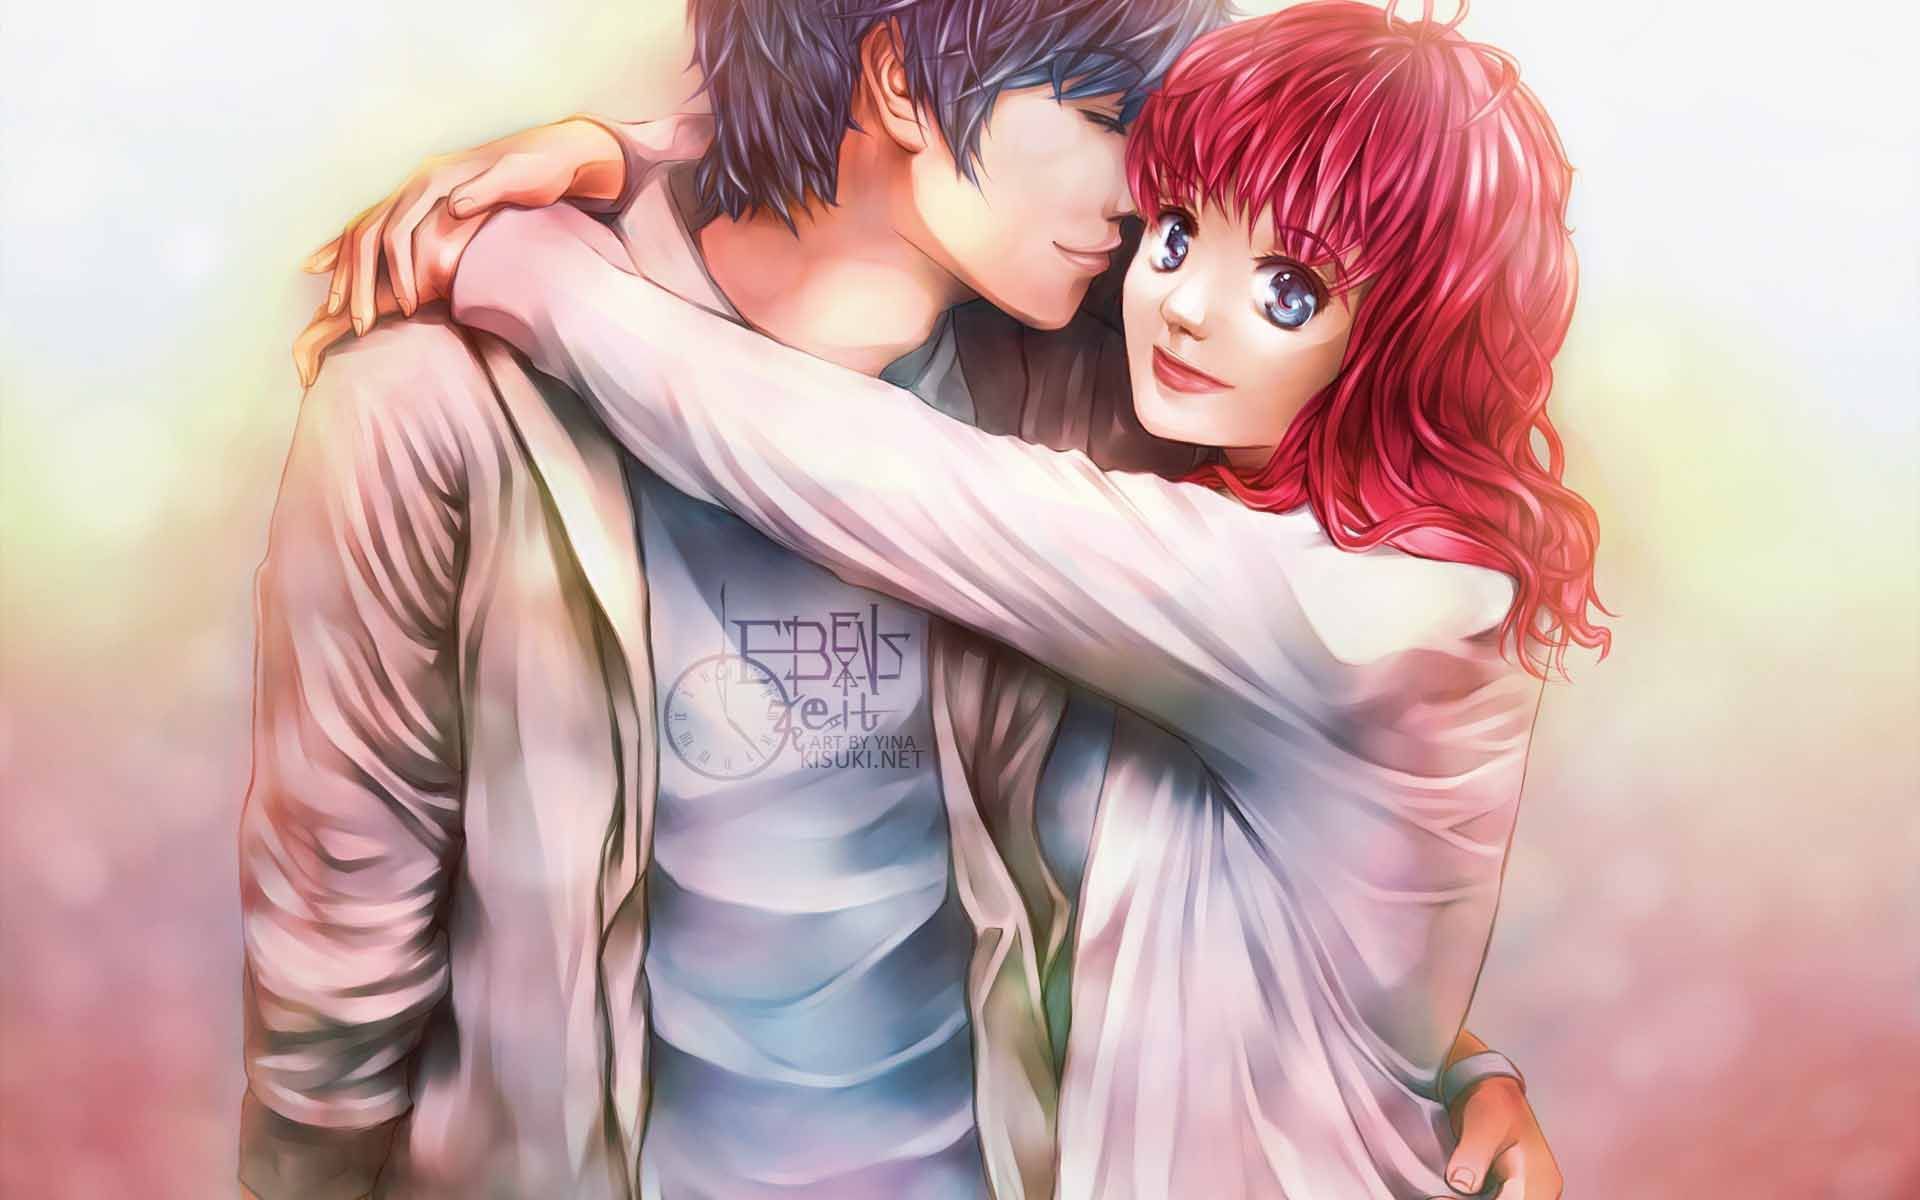 Anime Girl And Boy Kiss Valentines Day Wallpapers